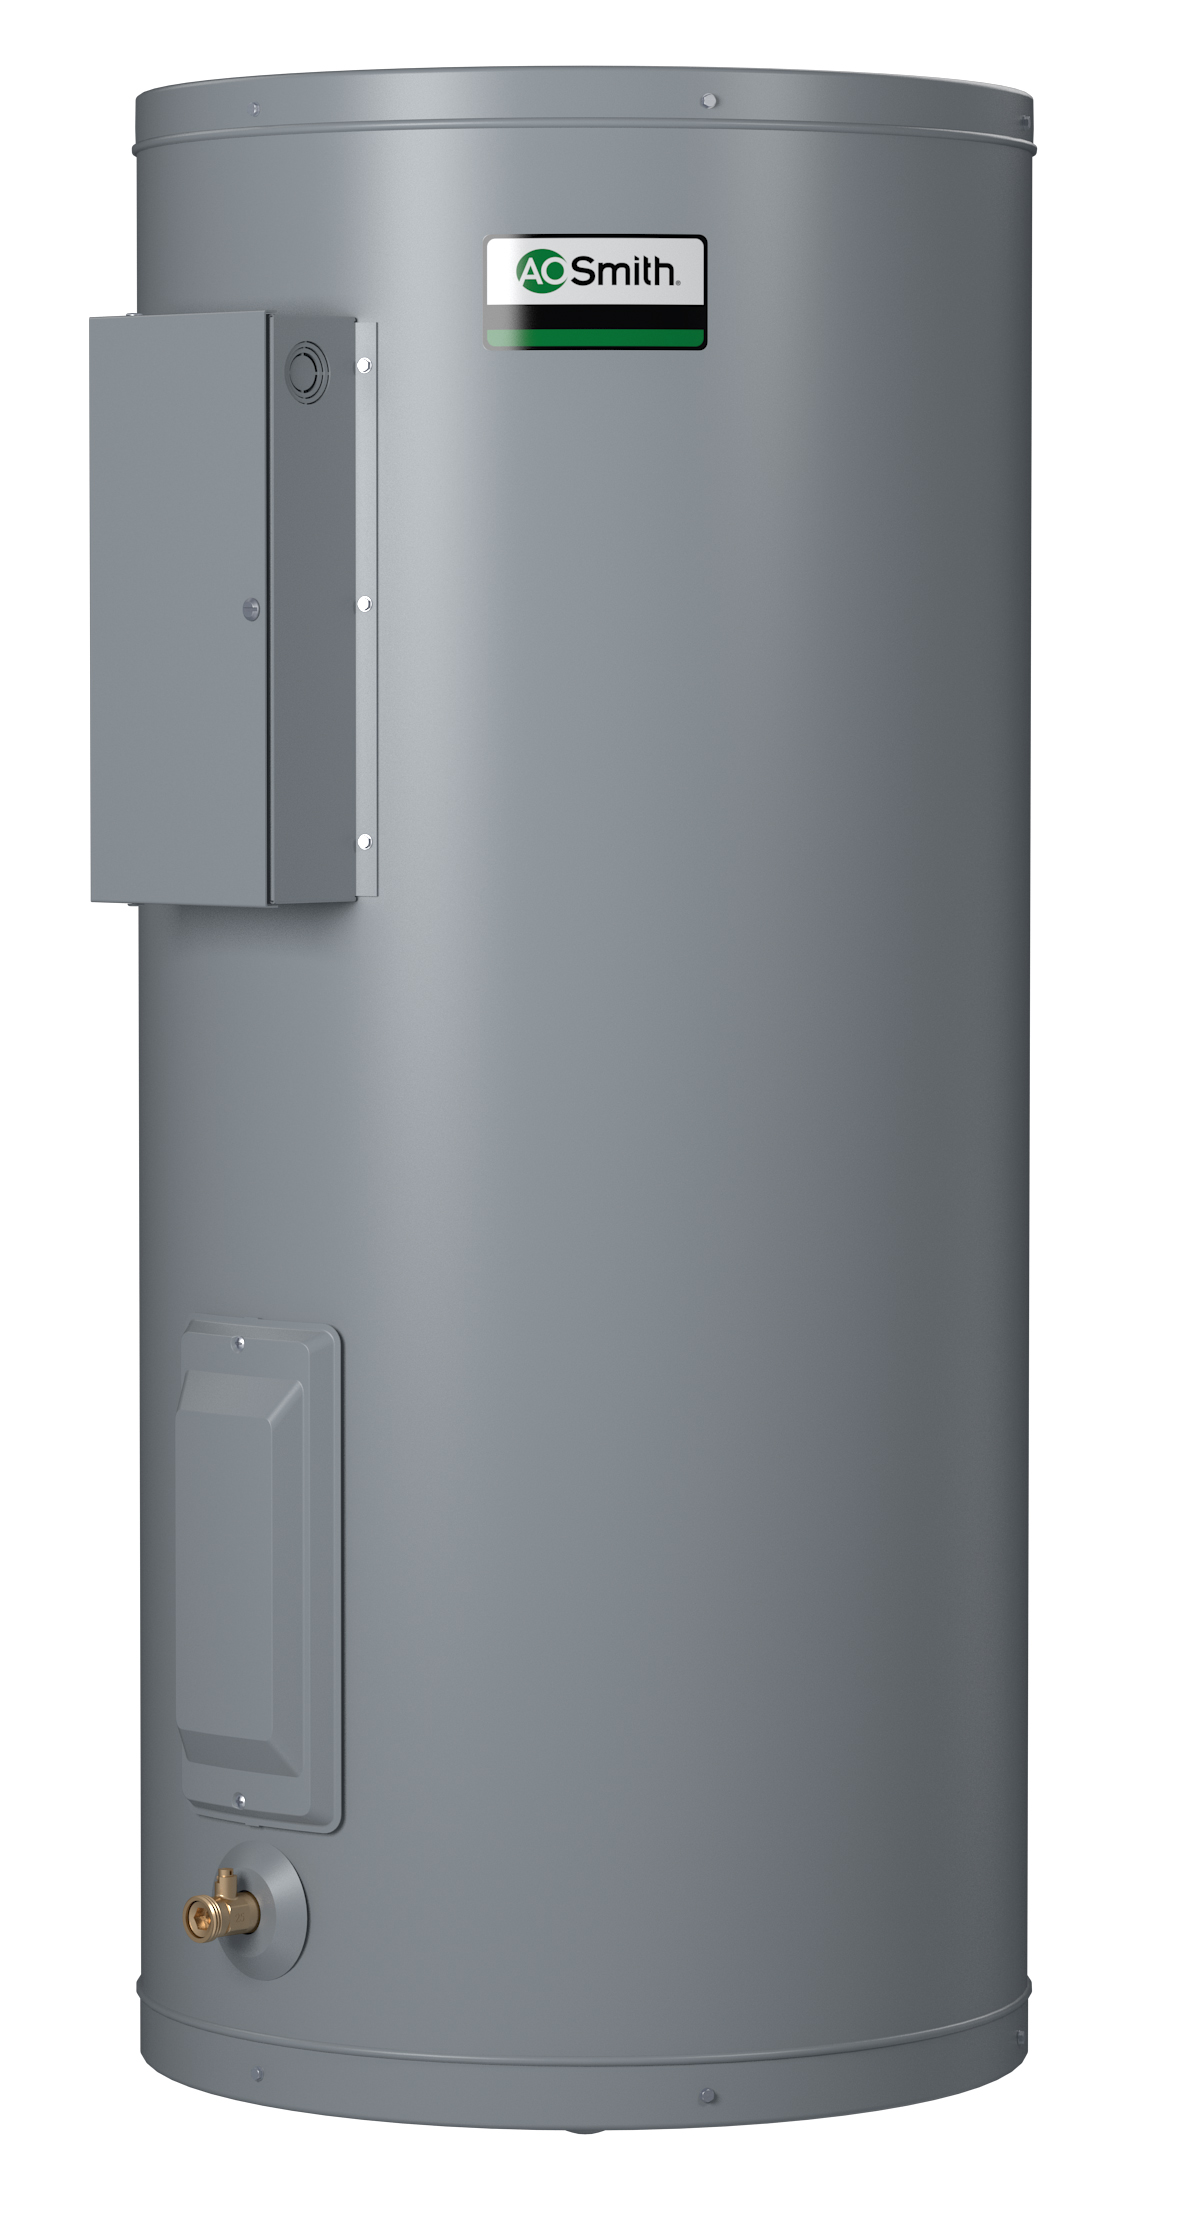 AO SMITH DEN-40D: 50 GALLONS, 9.0KW, 208 VOLT, 3 PHASE, (2-4500 WATT ELEMENTS, SIMULTANEOUS WIRING), DURA-POWER, LIGHT DUTY COMMERCIAL ELECTRIC WATER HEATER